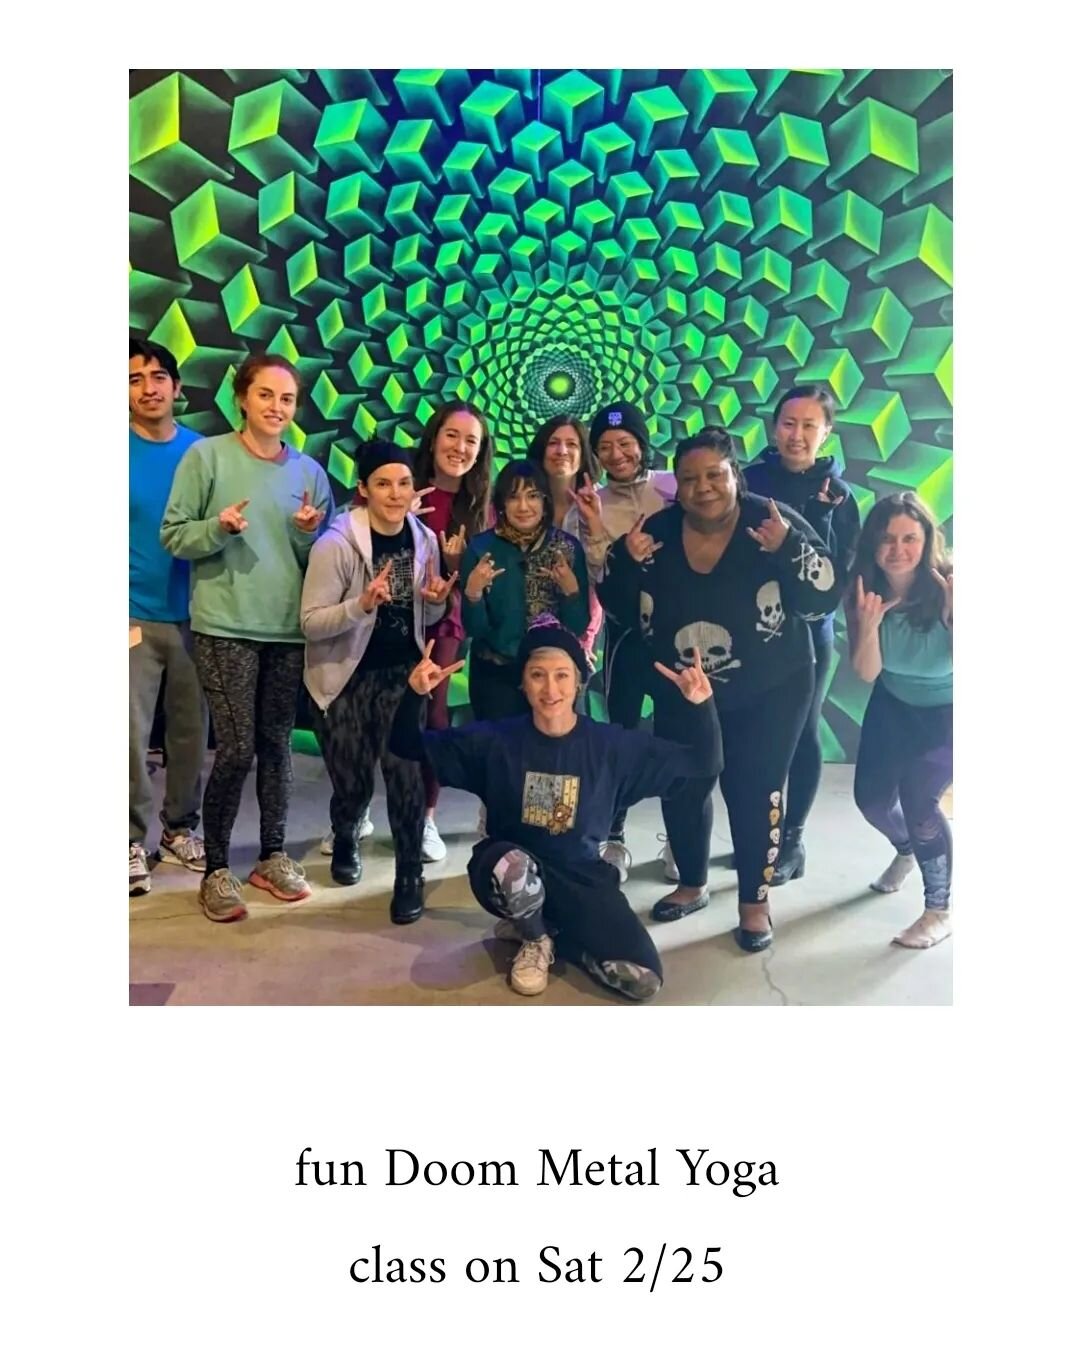 This Sat 3/4, it's a lovely vinyasa flow in the taproom with @livs_210 at HiDef. Come!

Wanna come but can't figure something out? Drop me a line and I'll help you fix it.